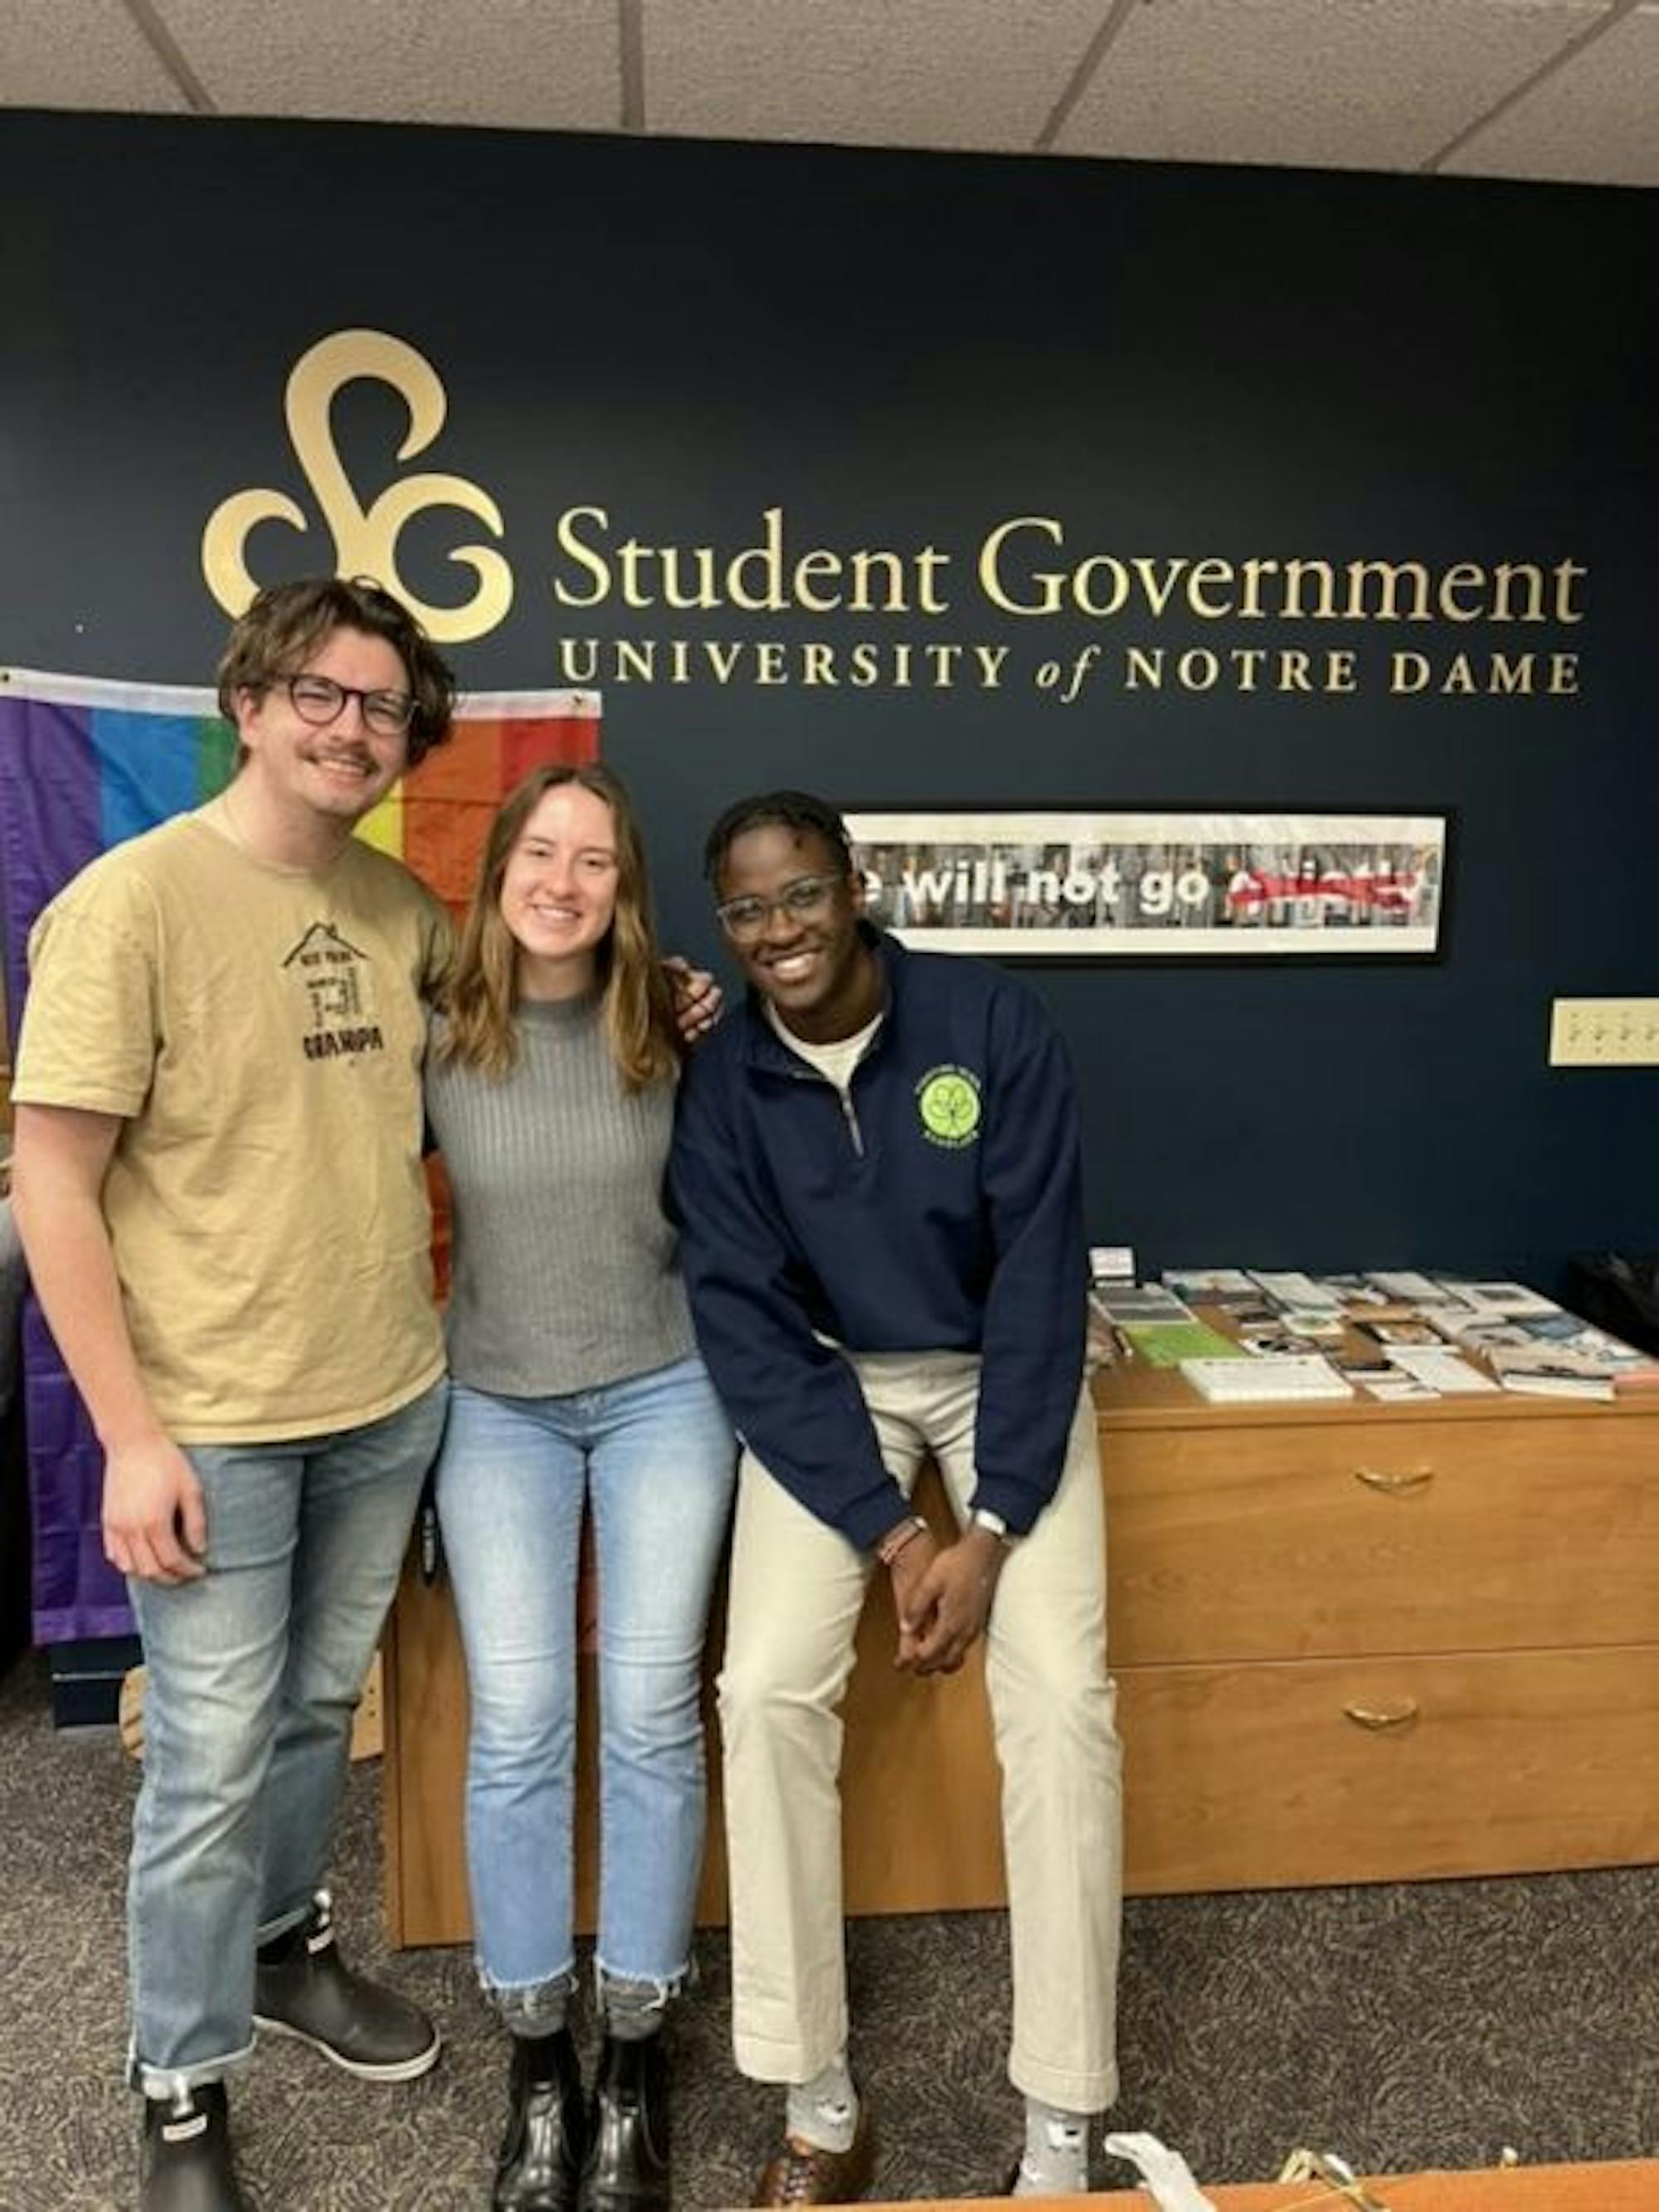 Outgoing Notre Dame student body leaders sit together in the student government offices on the third floor of LaFortune Student Center. From left to right, Matthew Bisner (Vice President), Alix Basden (chief of staff) and Allan Njomo (president).